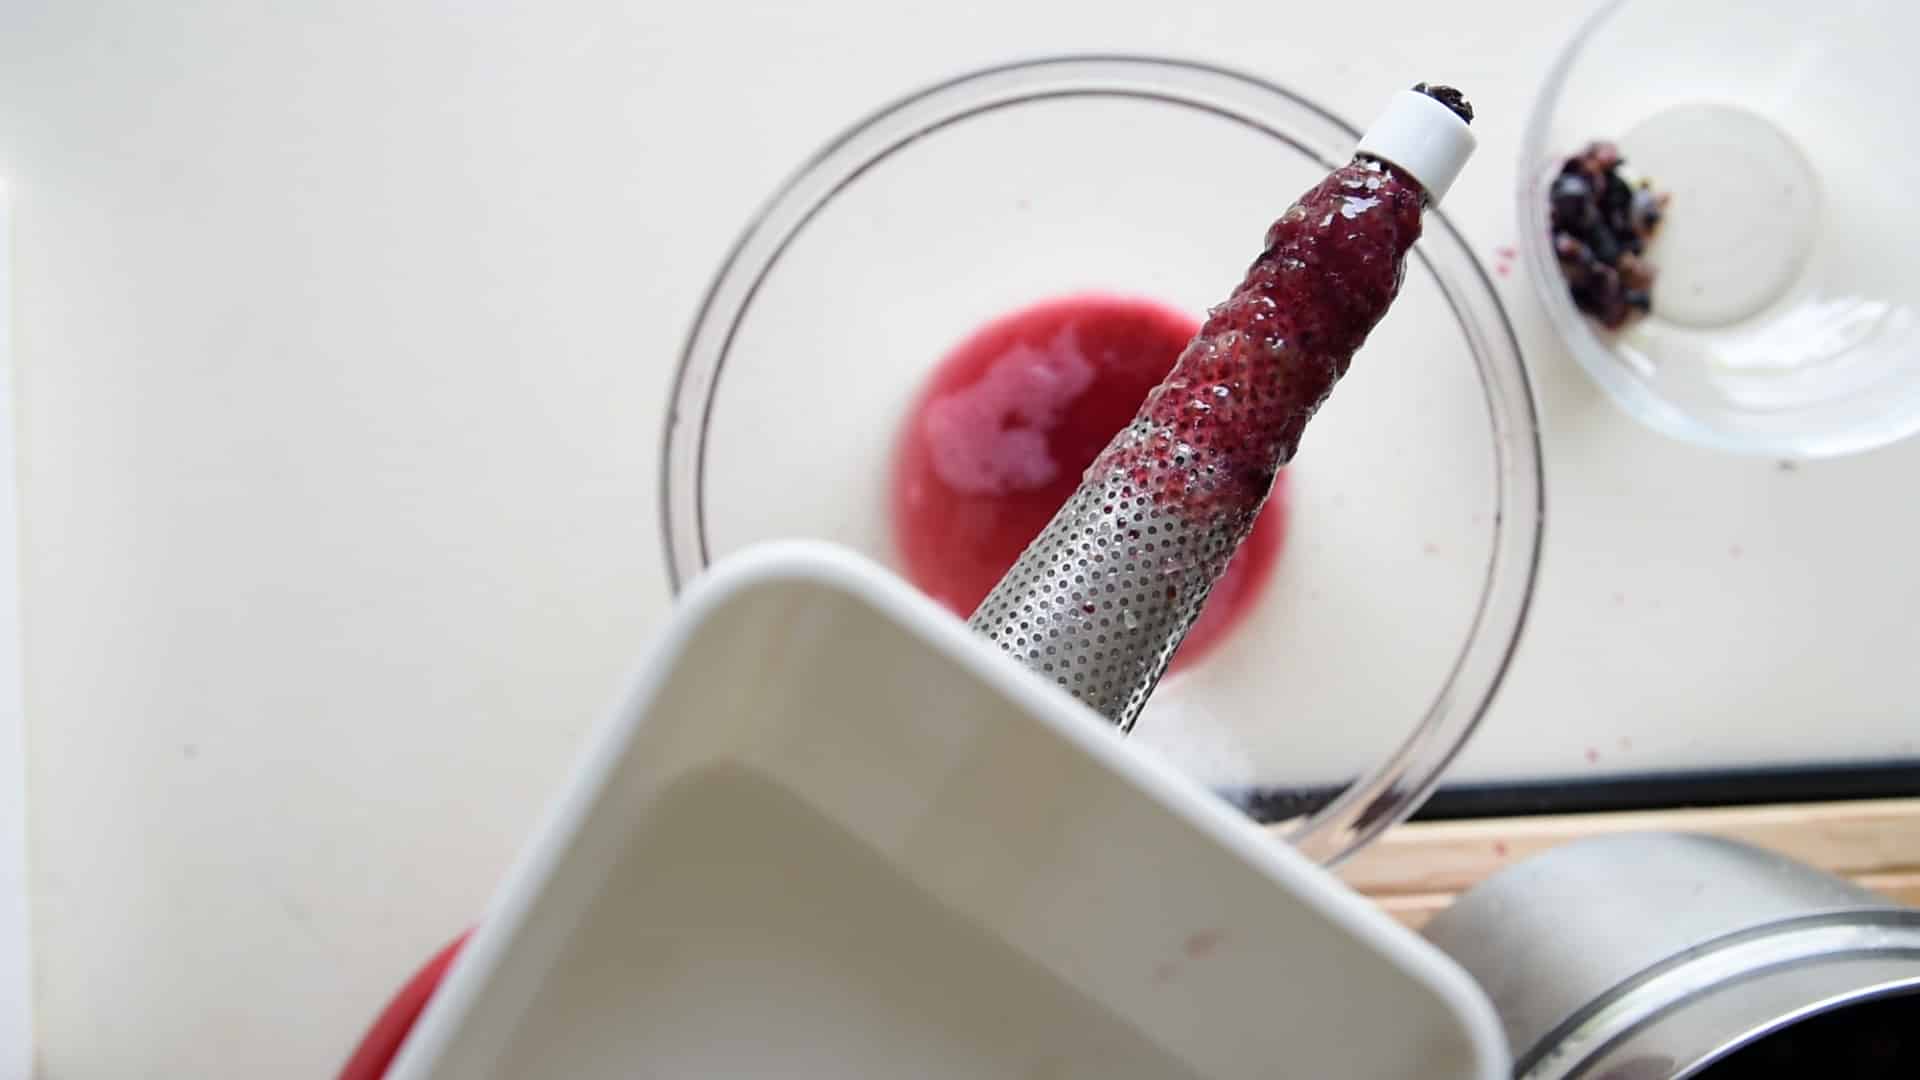 Pass the grapes through an electrical vegetable strainer